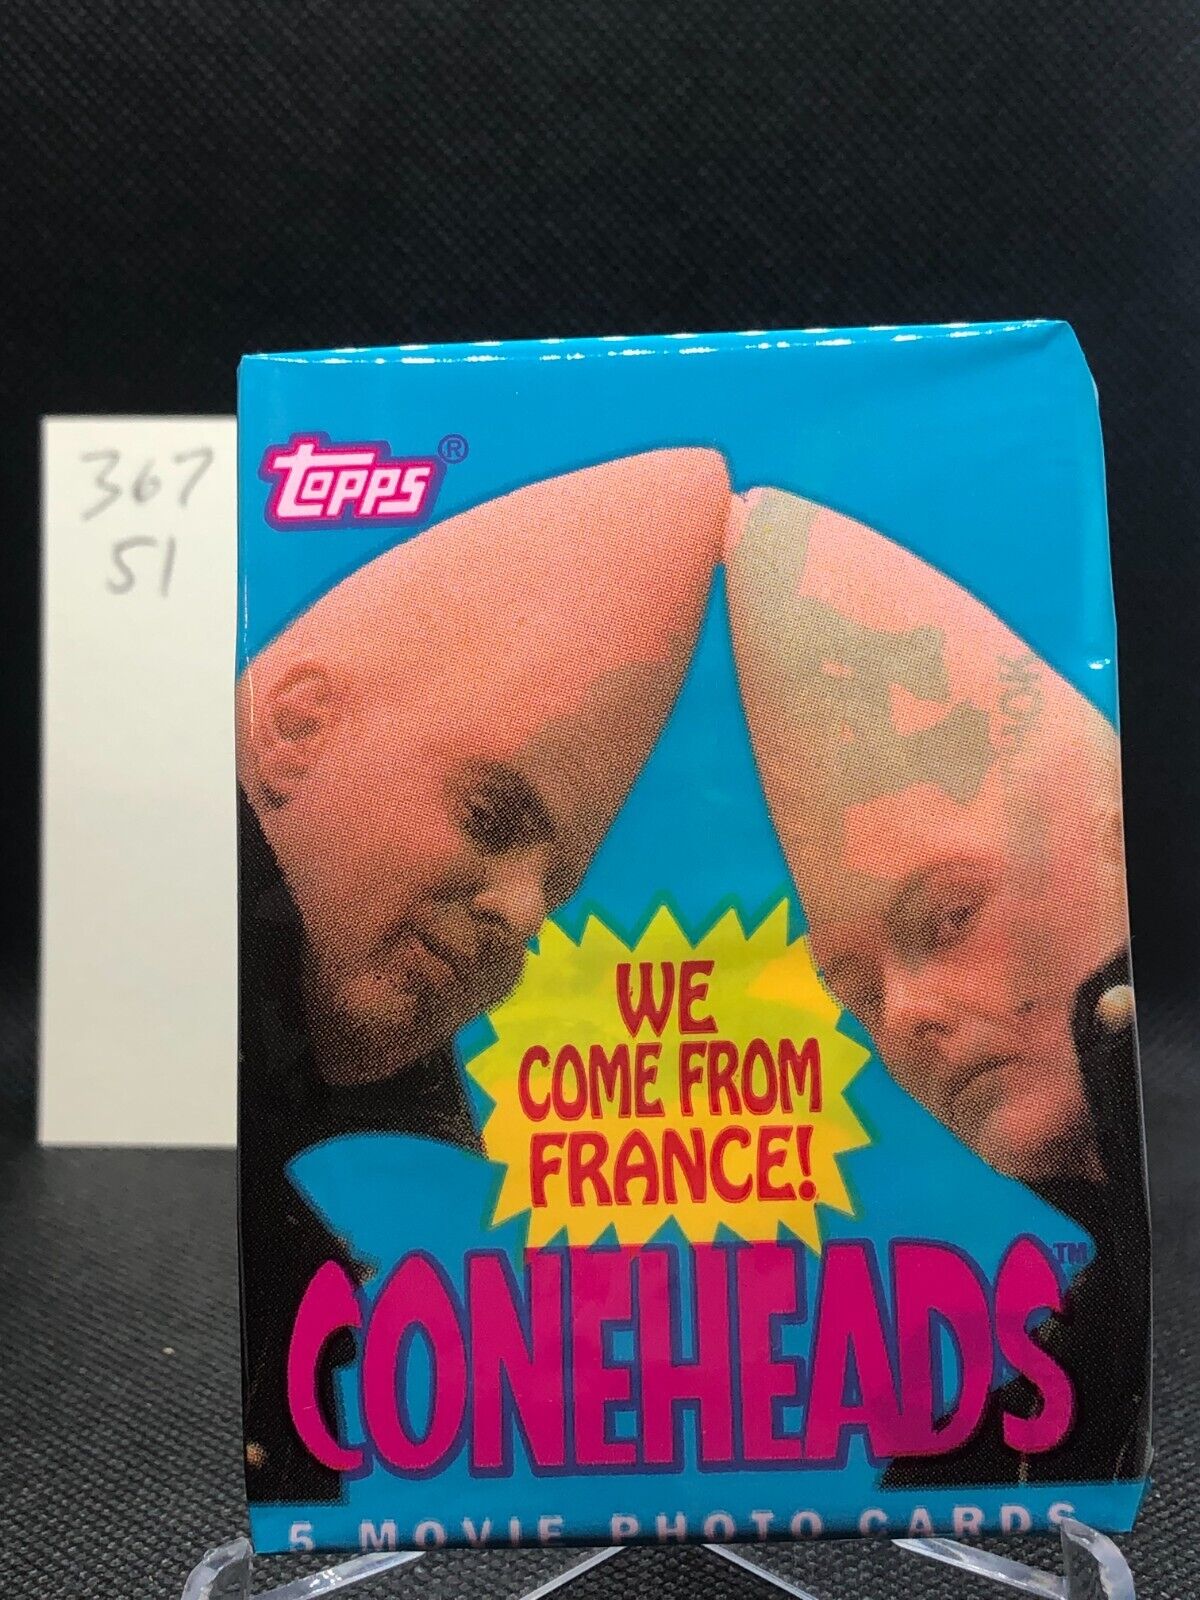 1993 Topps Coneheads Movie Photo Cards Factory Sealed Pack (1) 5 Cards Per Pack